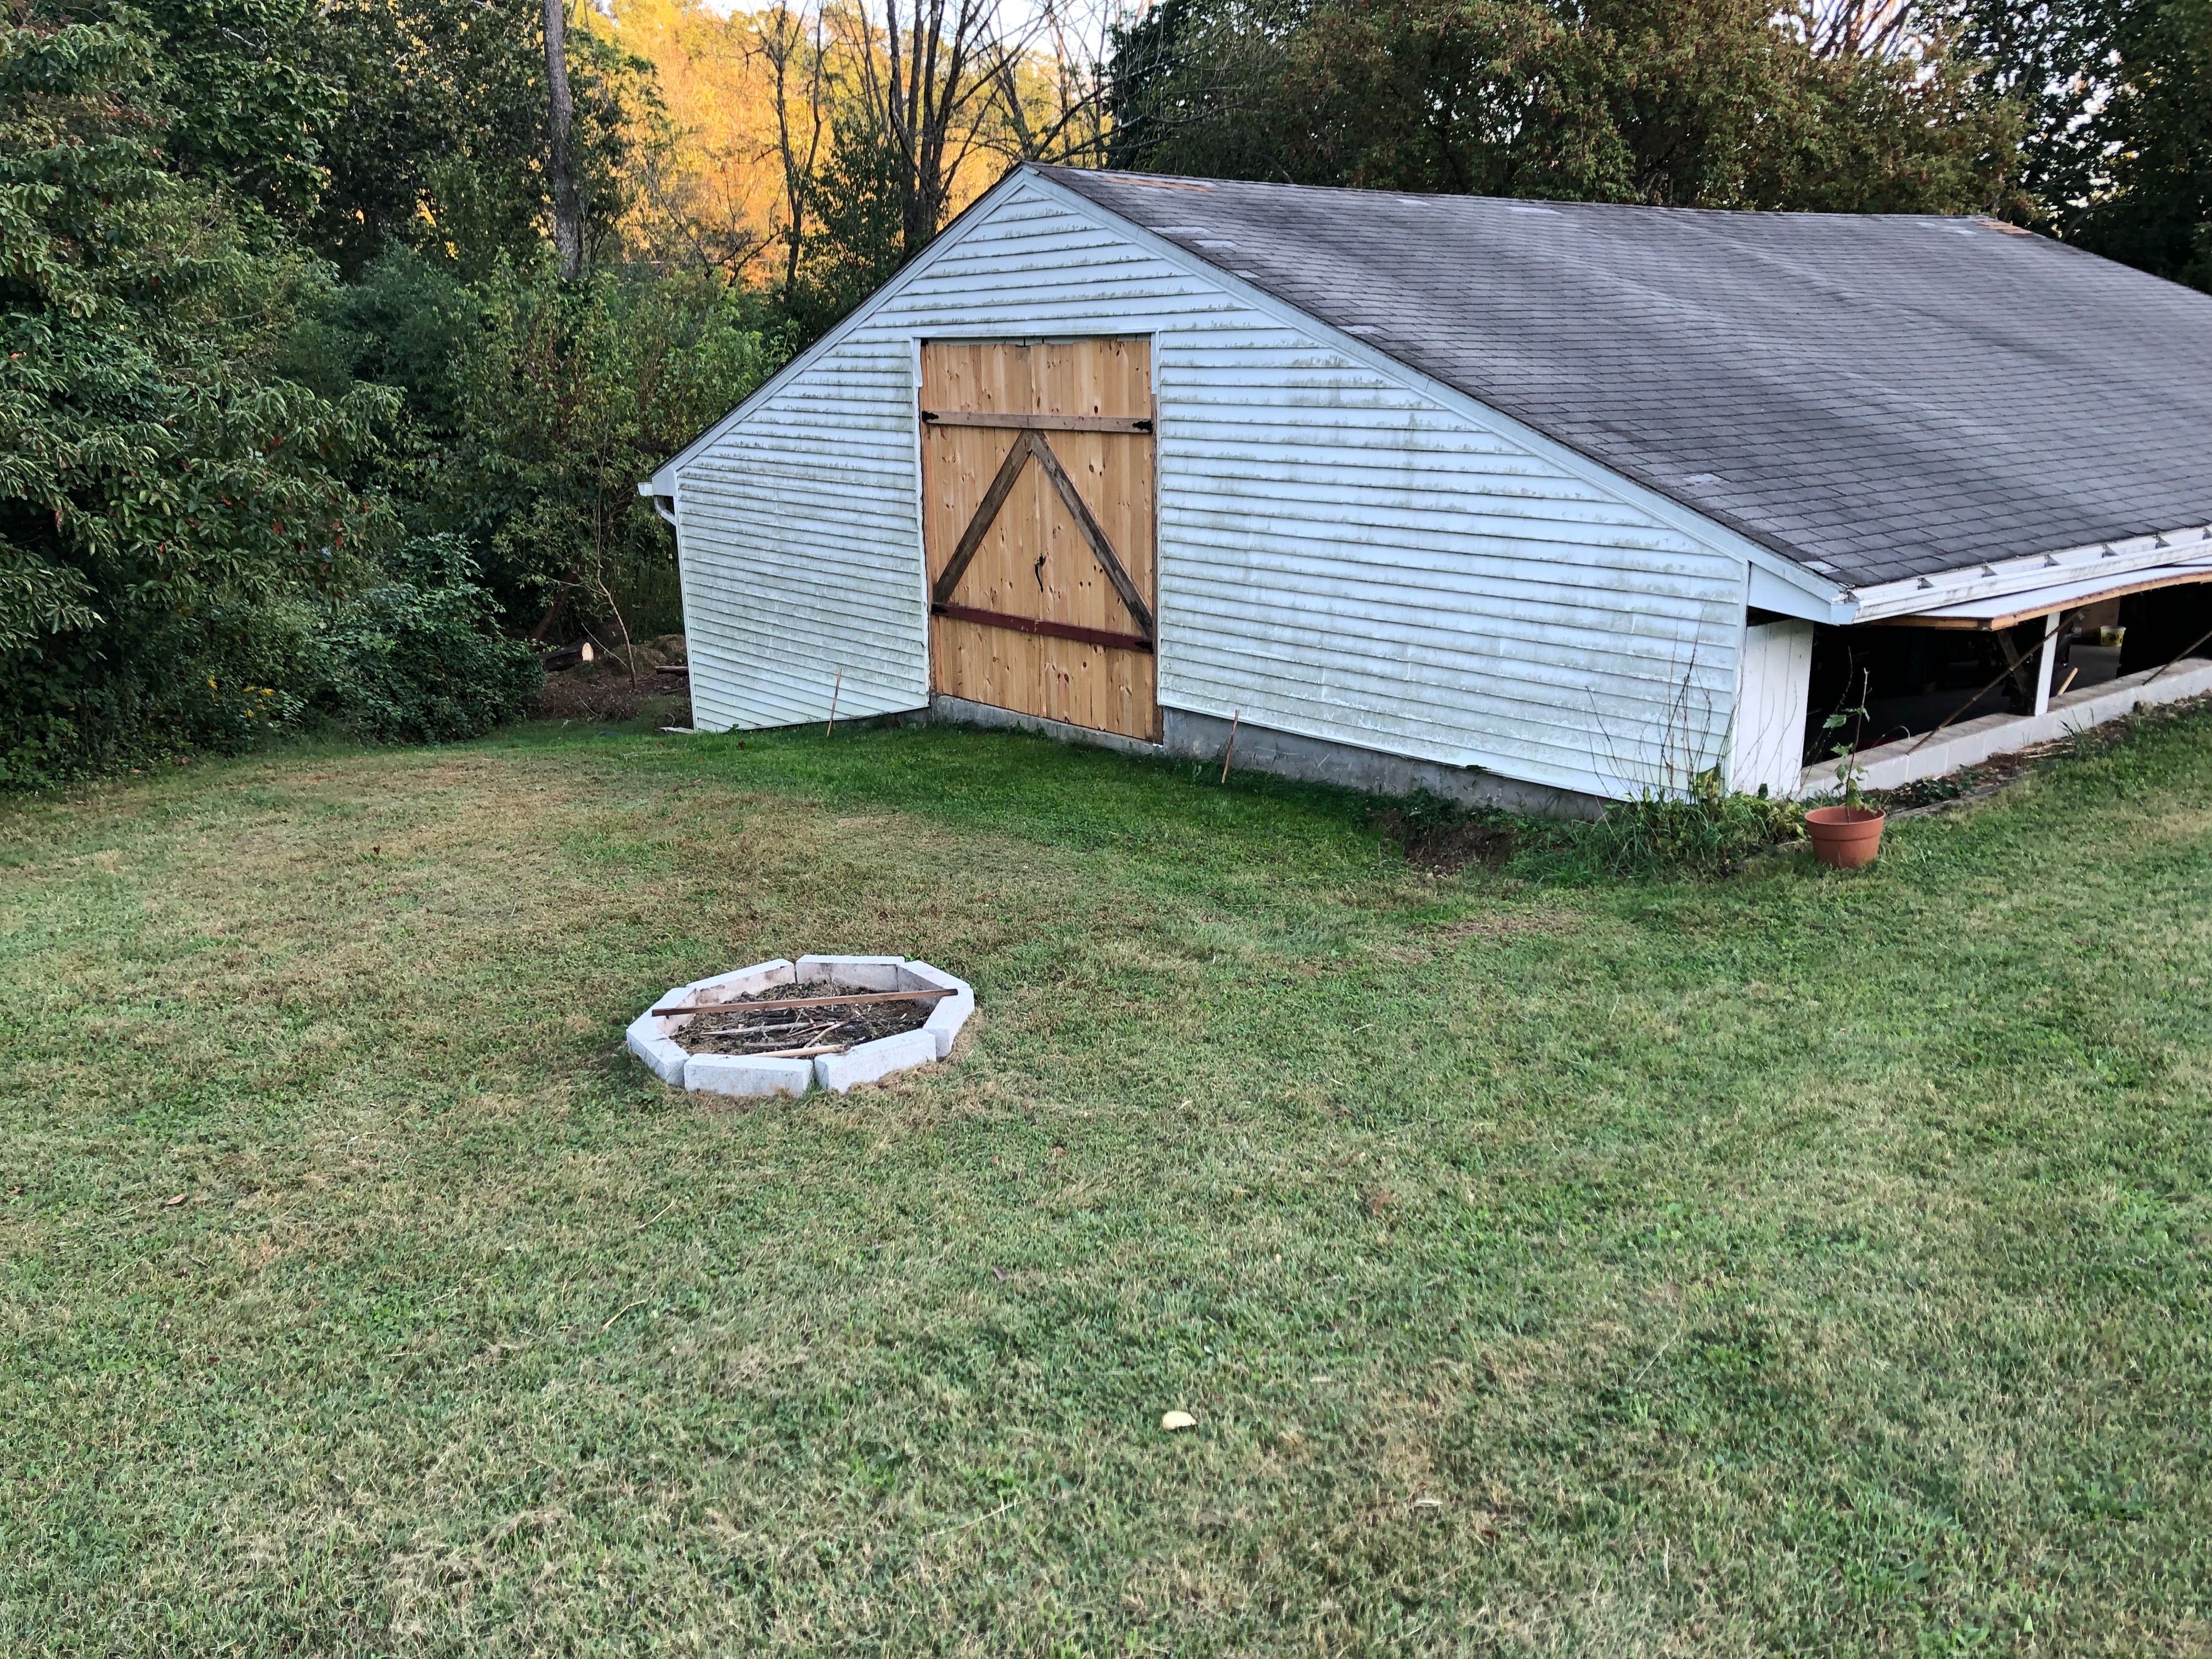 Barn door #3 and Fire pit #2